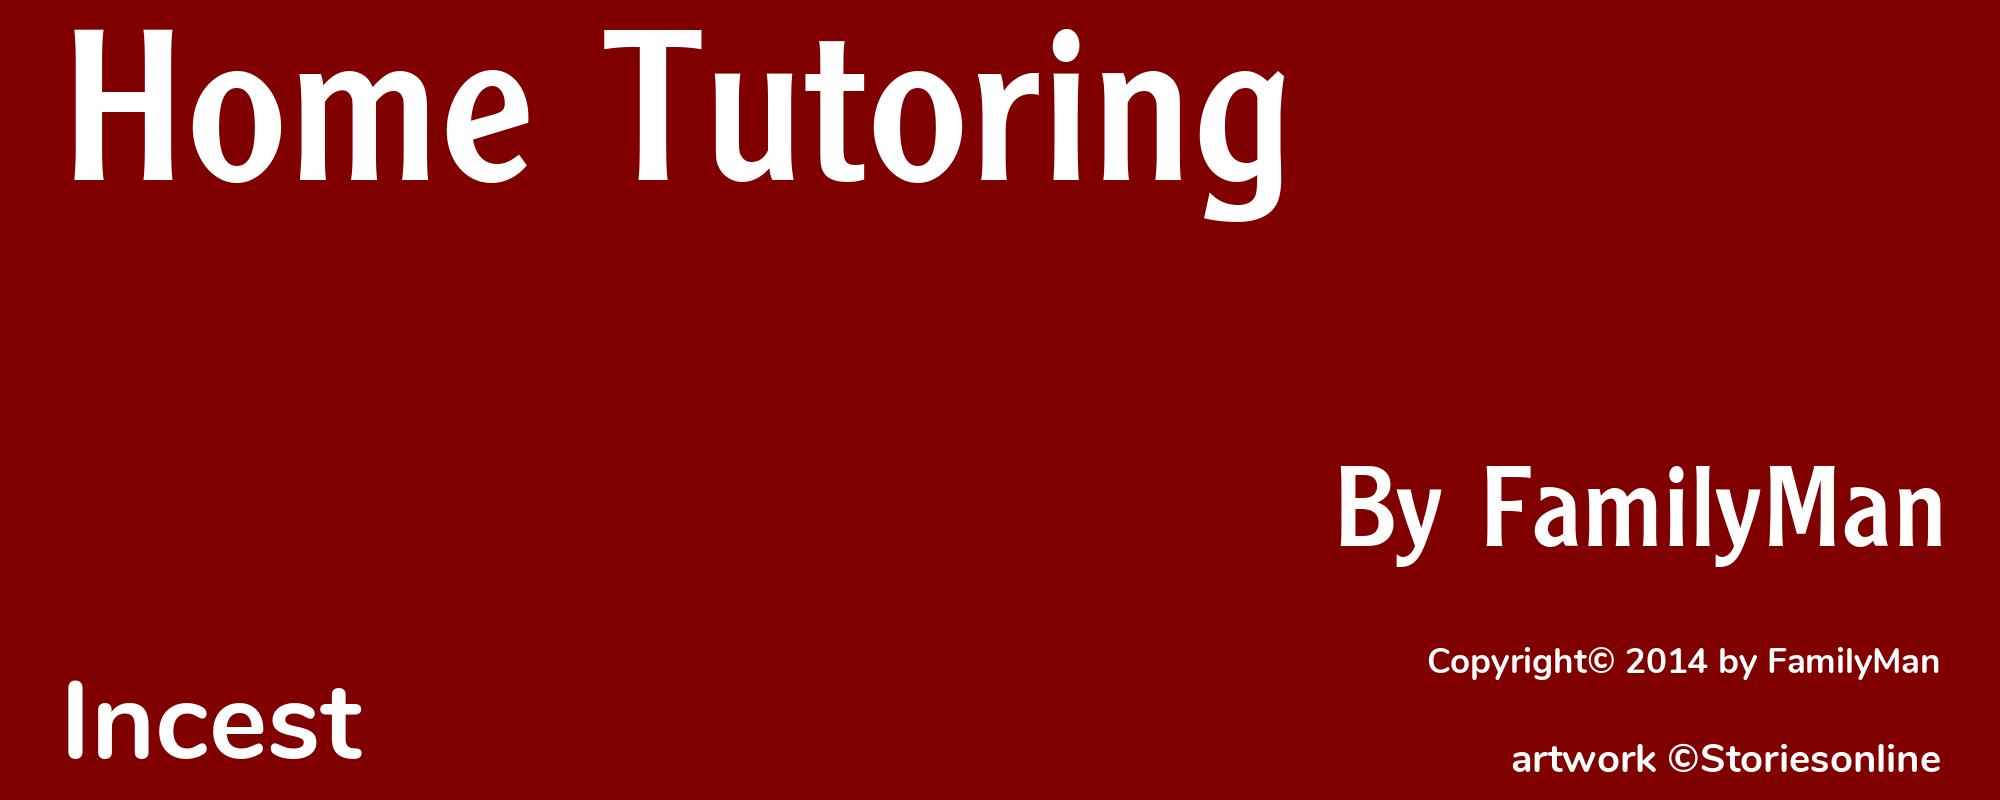 Home Tutoring - Cover